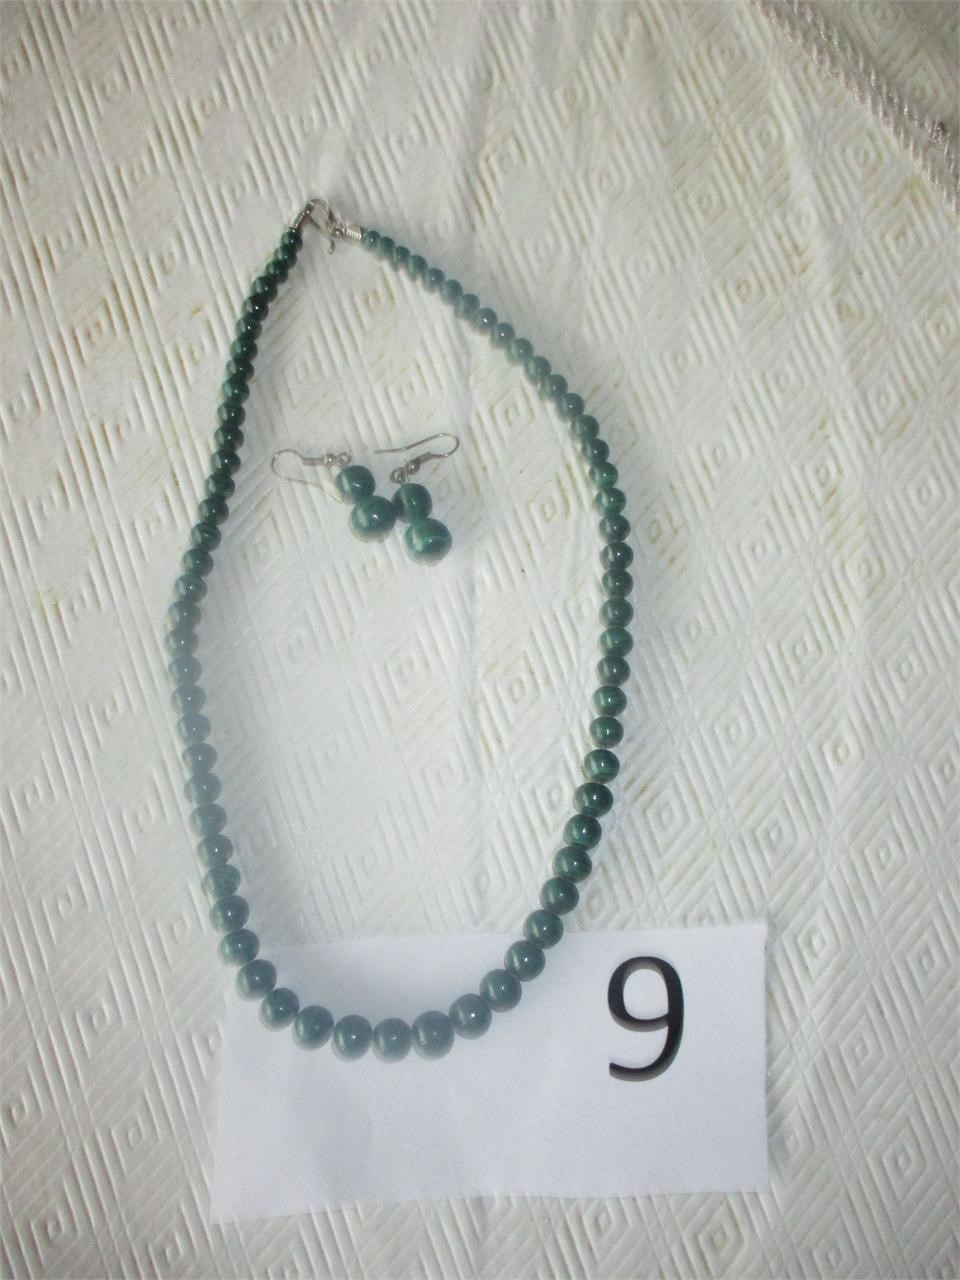 Necklace and Earrings --Possibly Agate